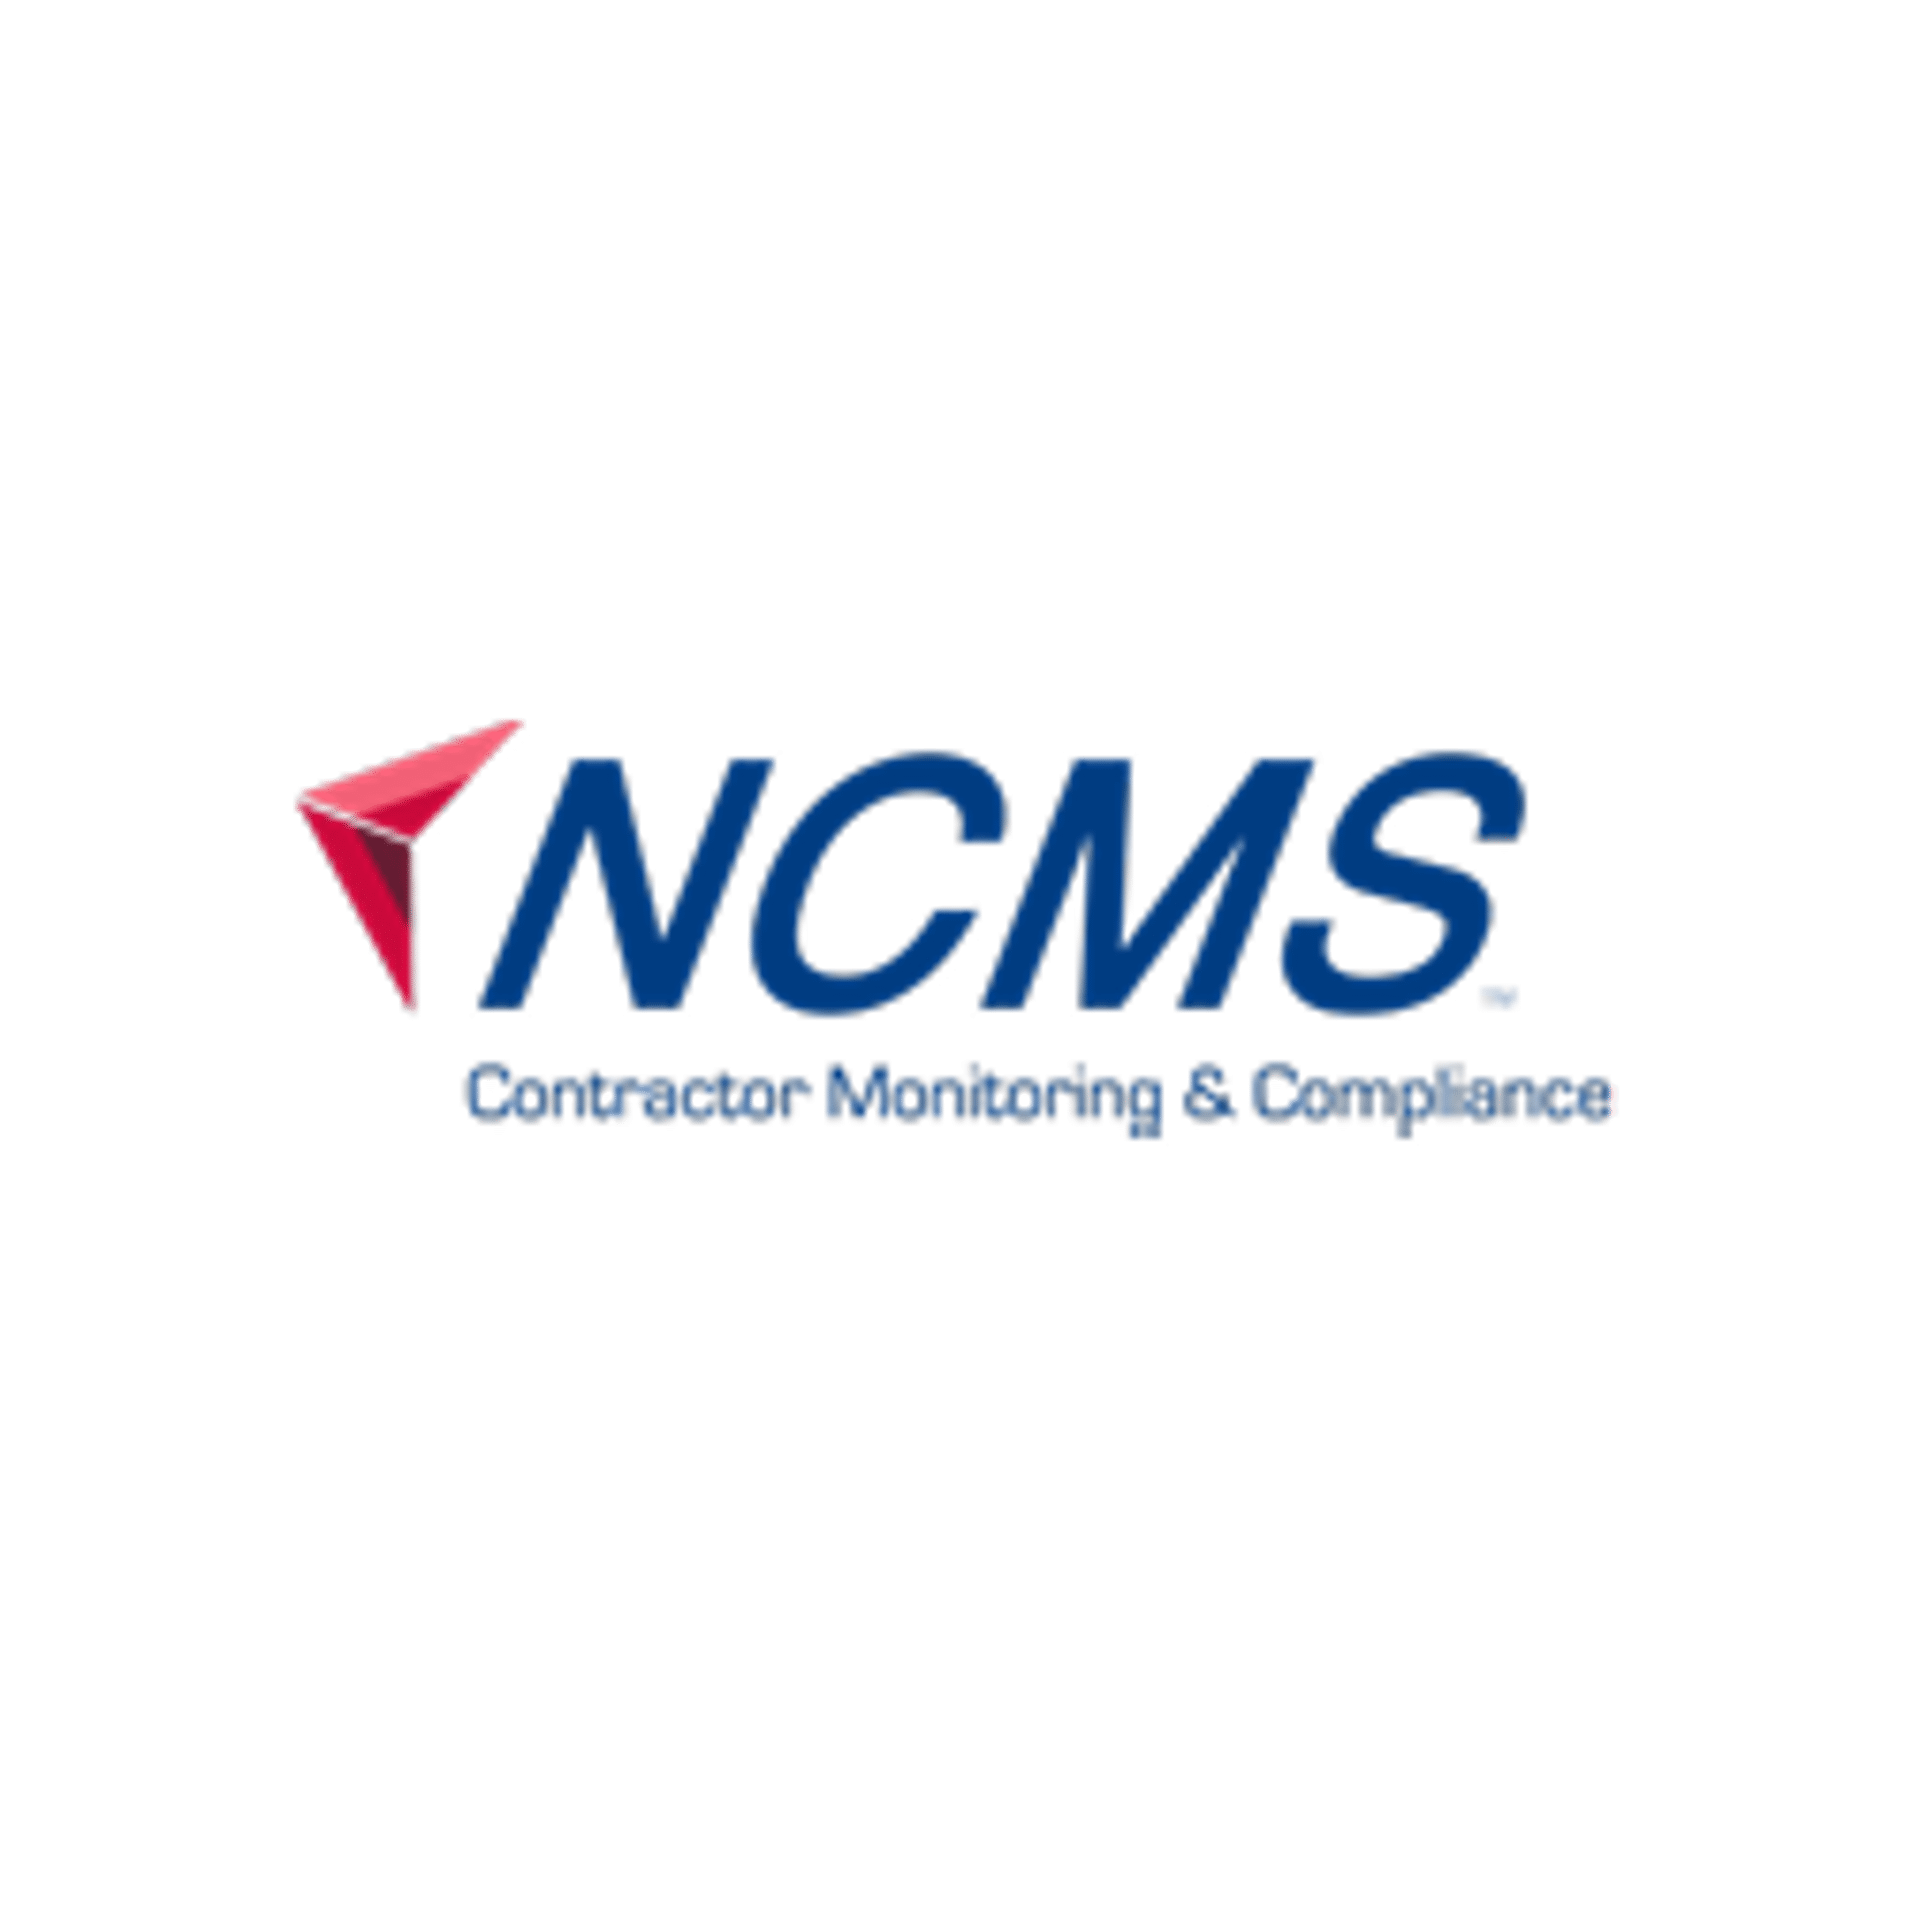 NCMS Contractor Monitoring and Compliance